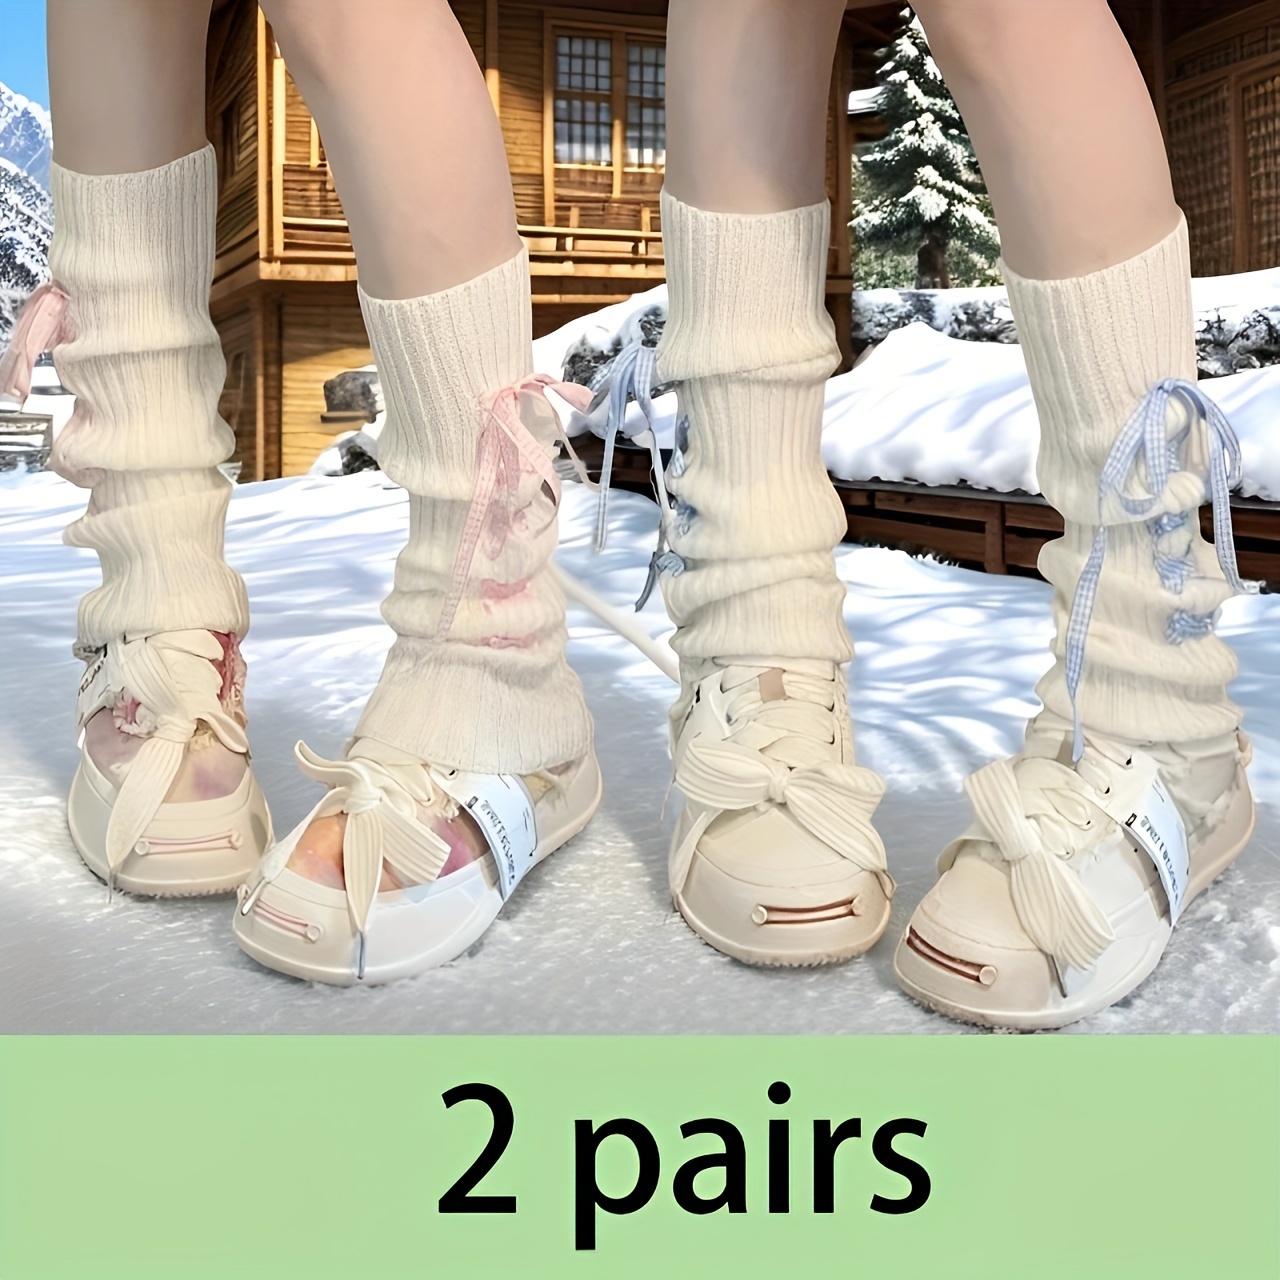 

1/2 Pairs Lace Up Knitted Leg Warmers, Y2k Cute Knee High Socks For Autumn/winter, Women's Stockings & Hosiery